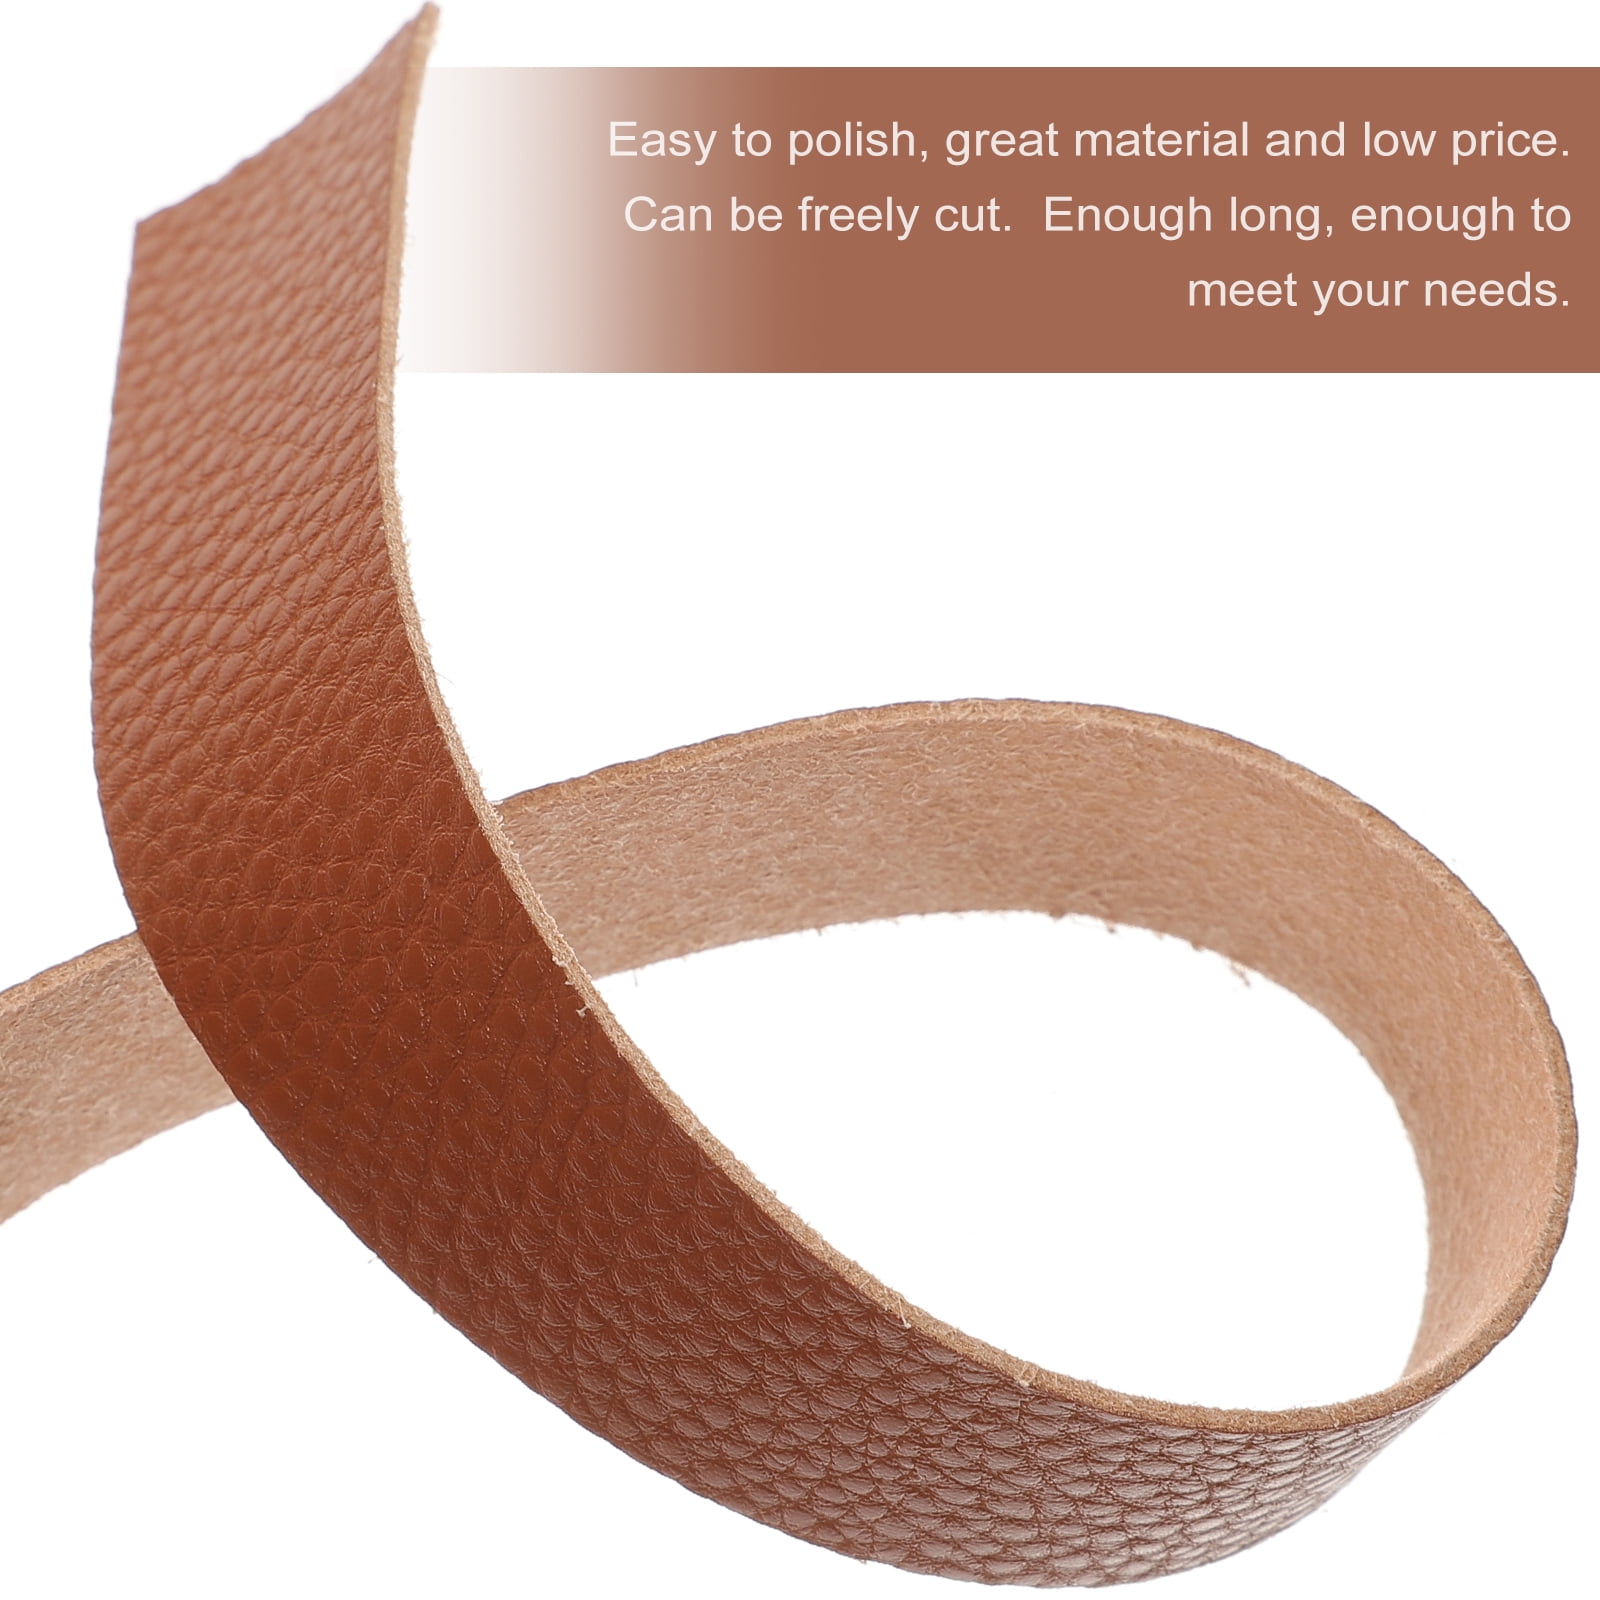 KJHBV 1 Roll Leather Roll DIY Leather Strap Leather Wrap Flat Cord Leather  Strips for DIY Crafts Making Crafting Leather Material Leather Strip Straps